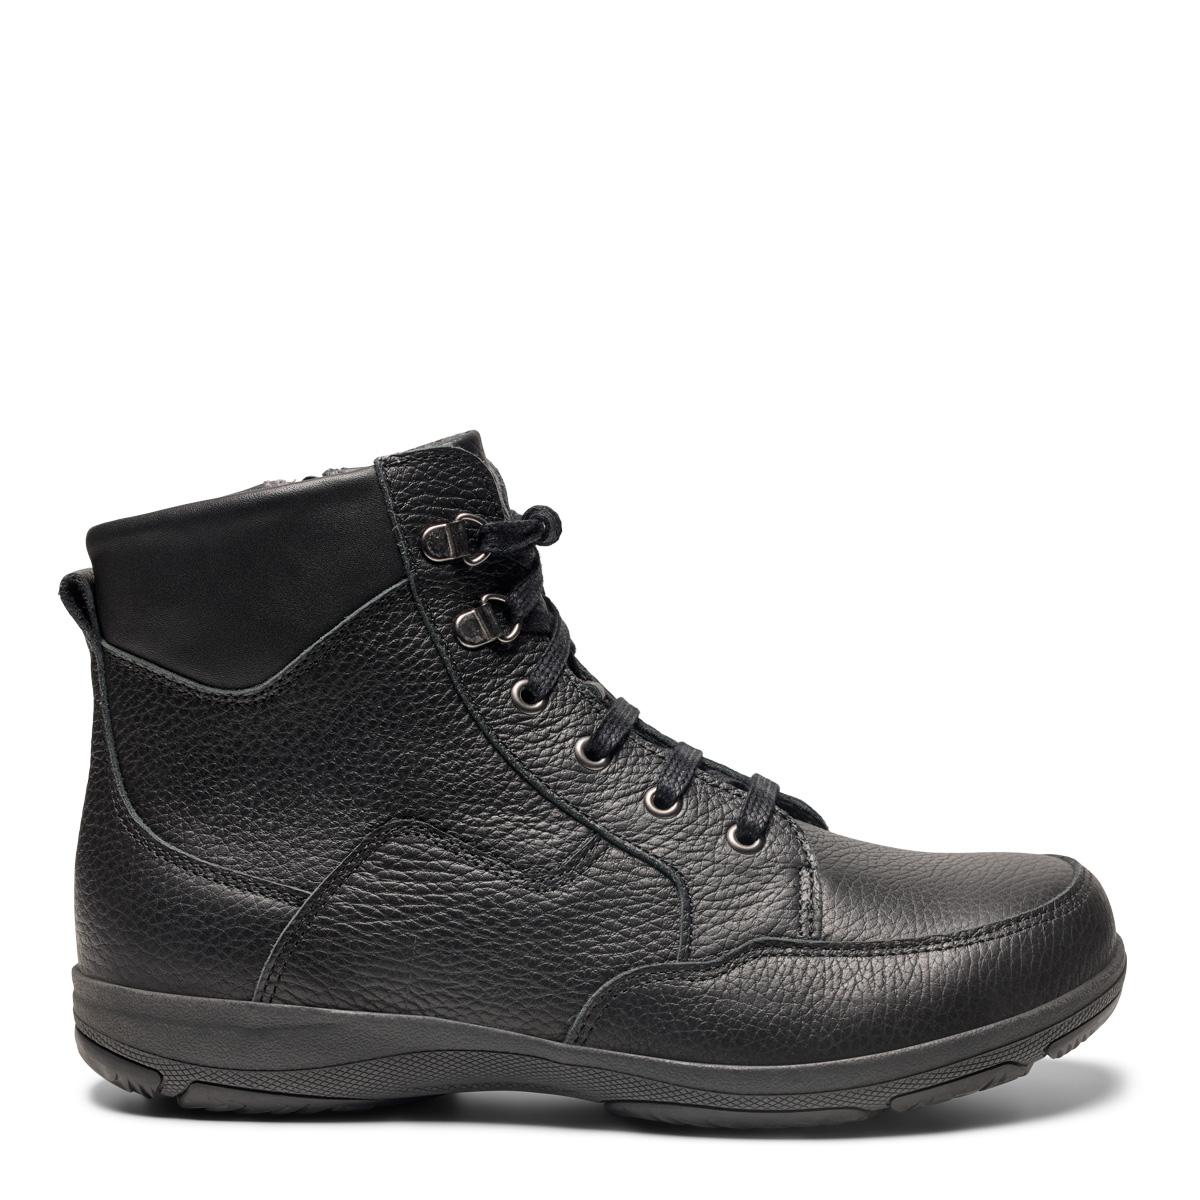 Lace-up boot for women - with zipper and lining